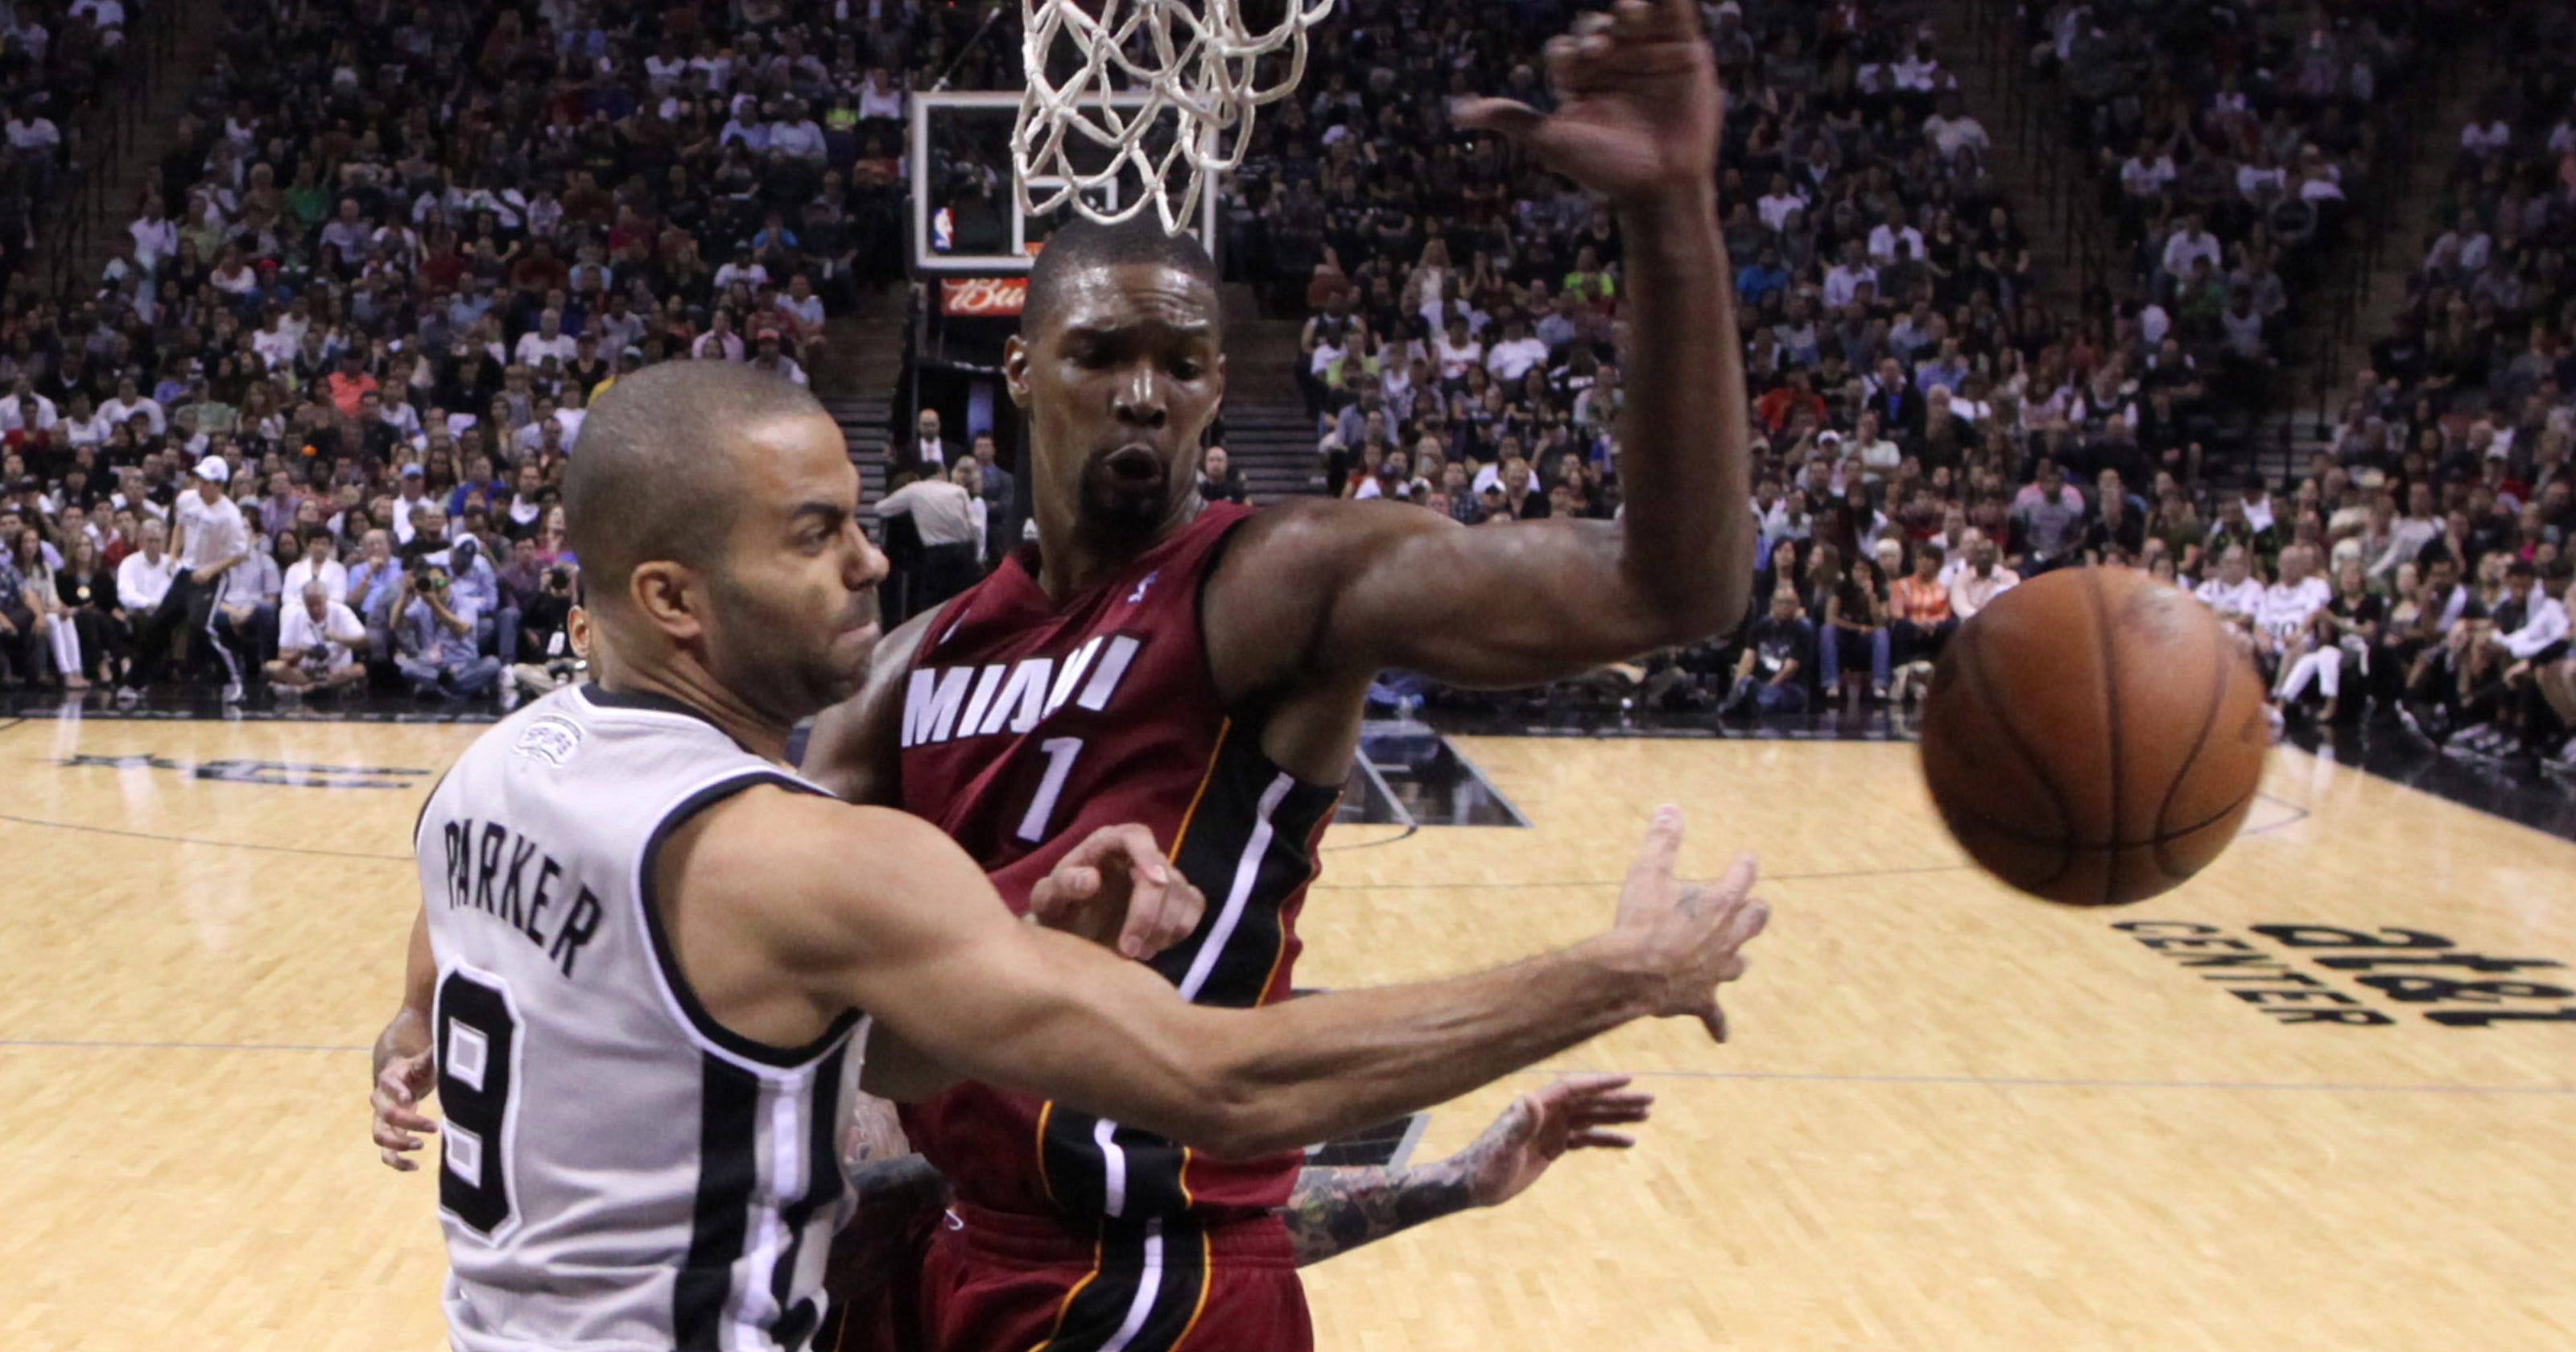 Scout takes on NBA Finals: Heat vs. Spurs, in depth3200 x 1680